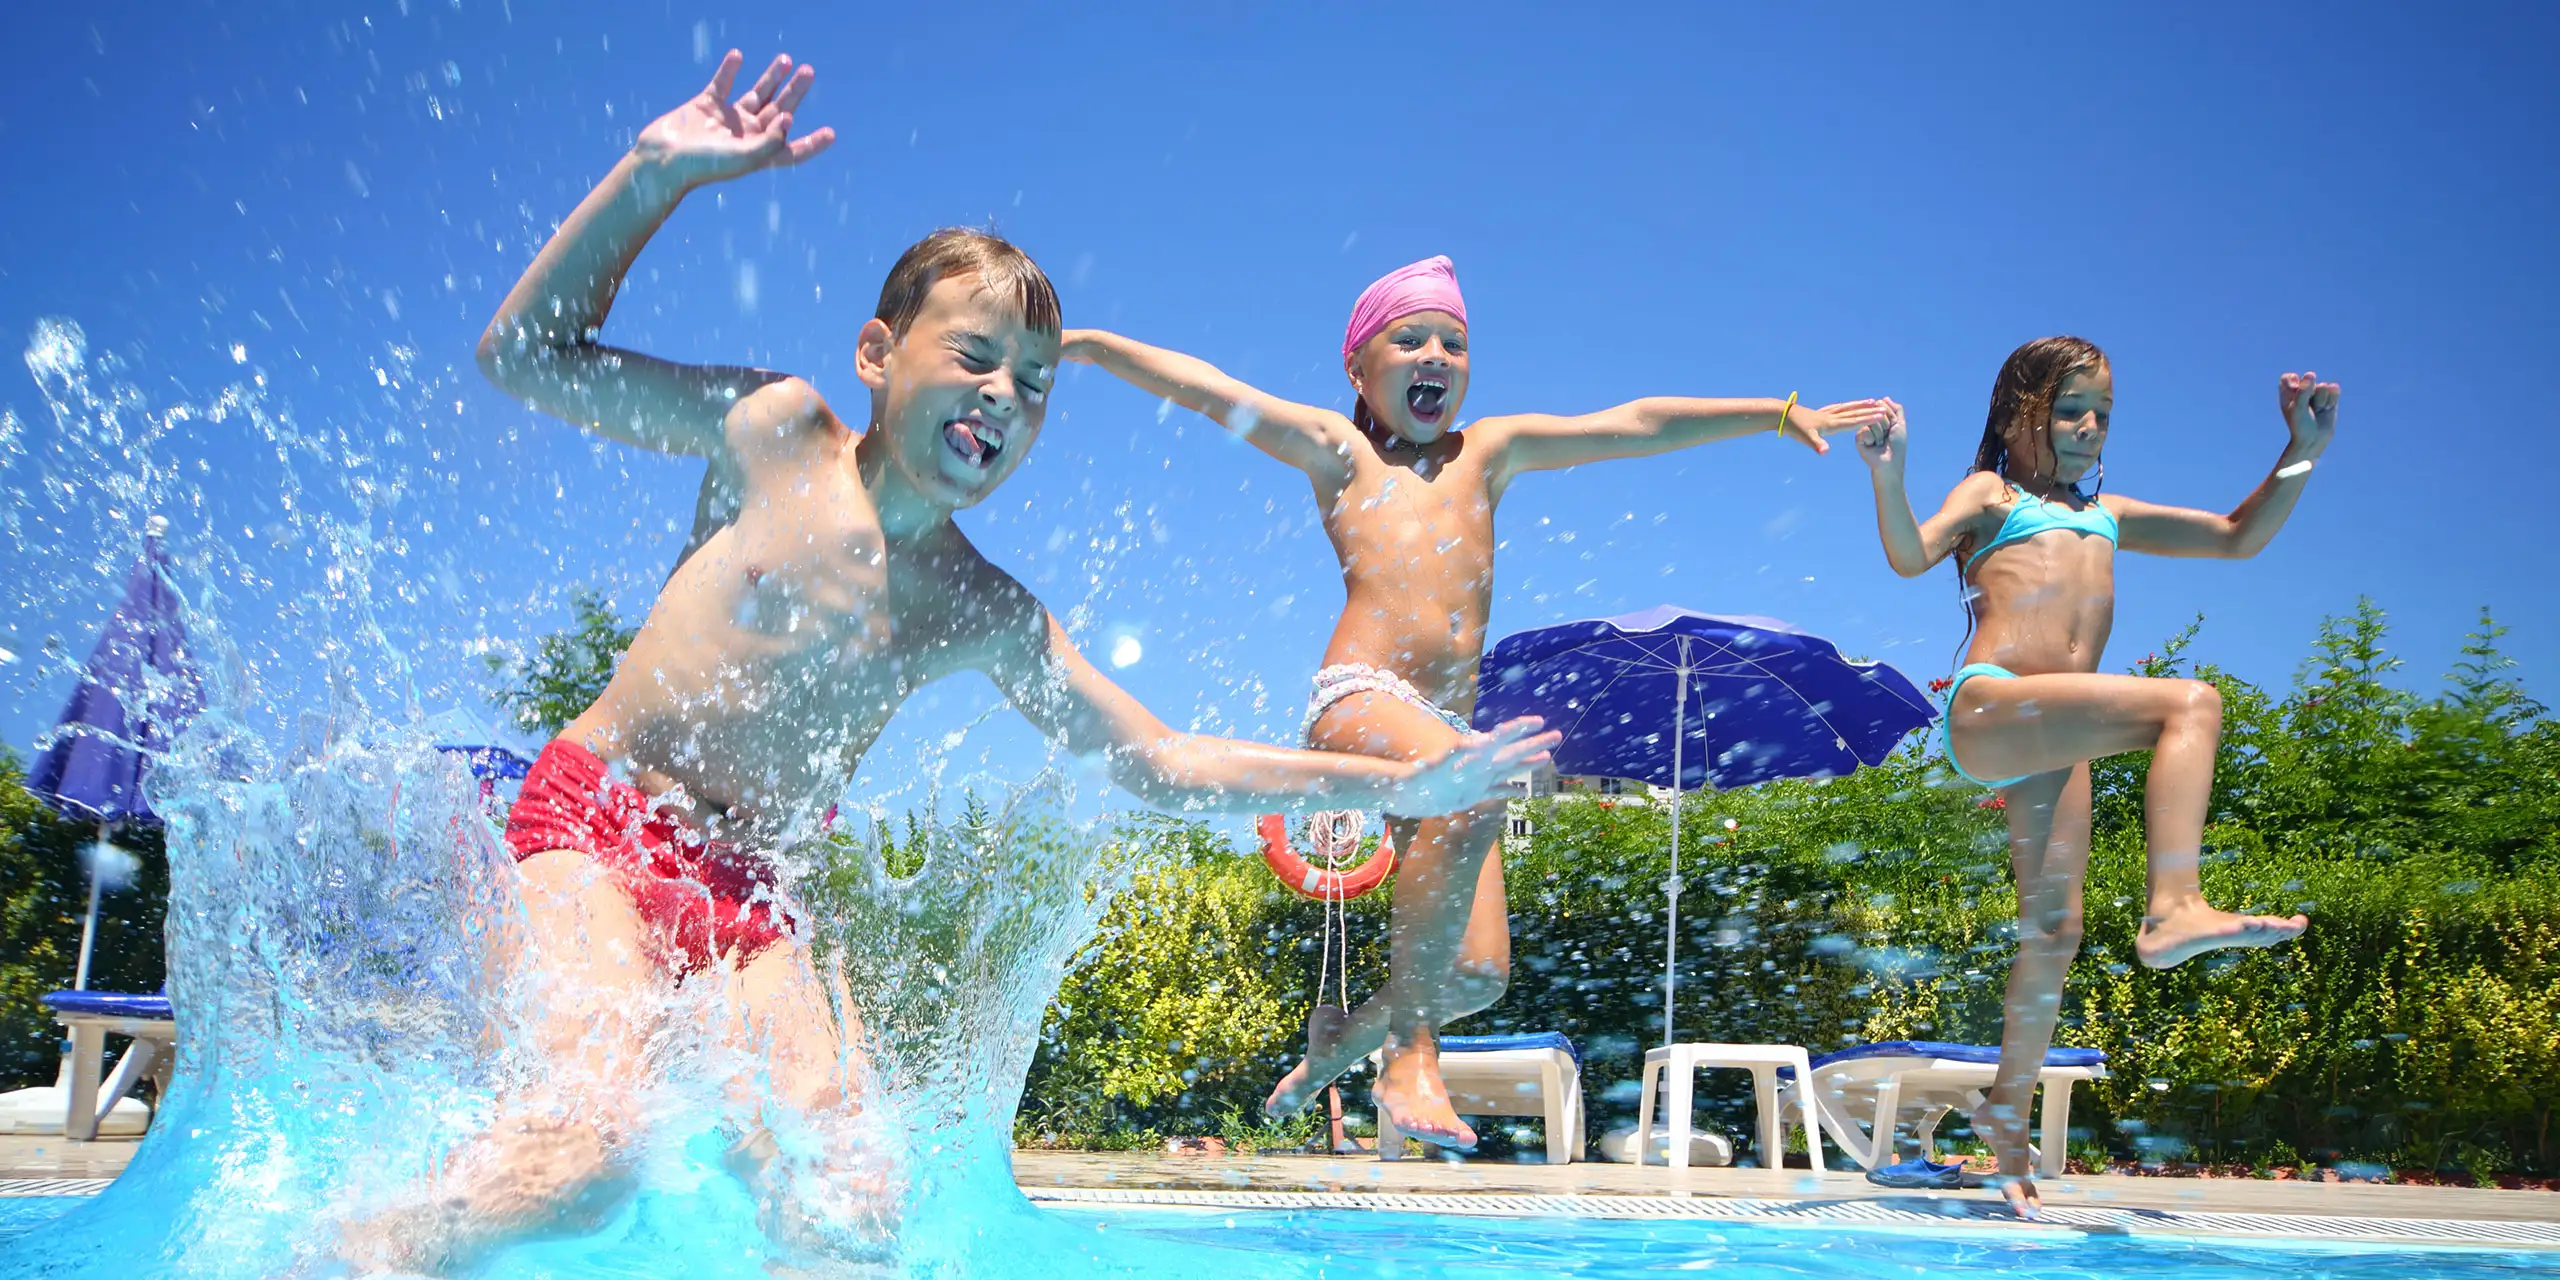 Kids Jumping in Pool; Courtesy of Pavel L Photo and Video/Shutterstock.com